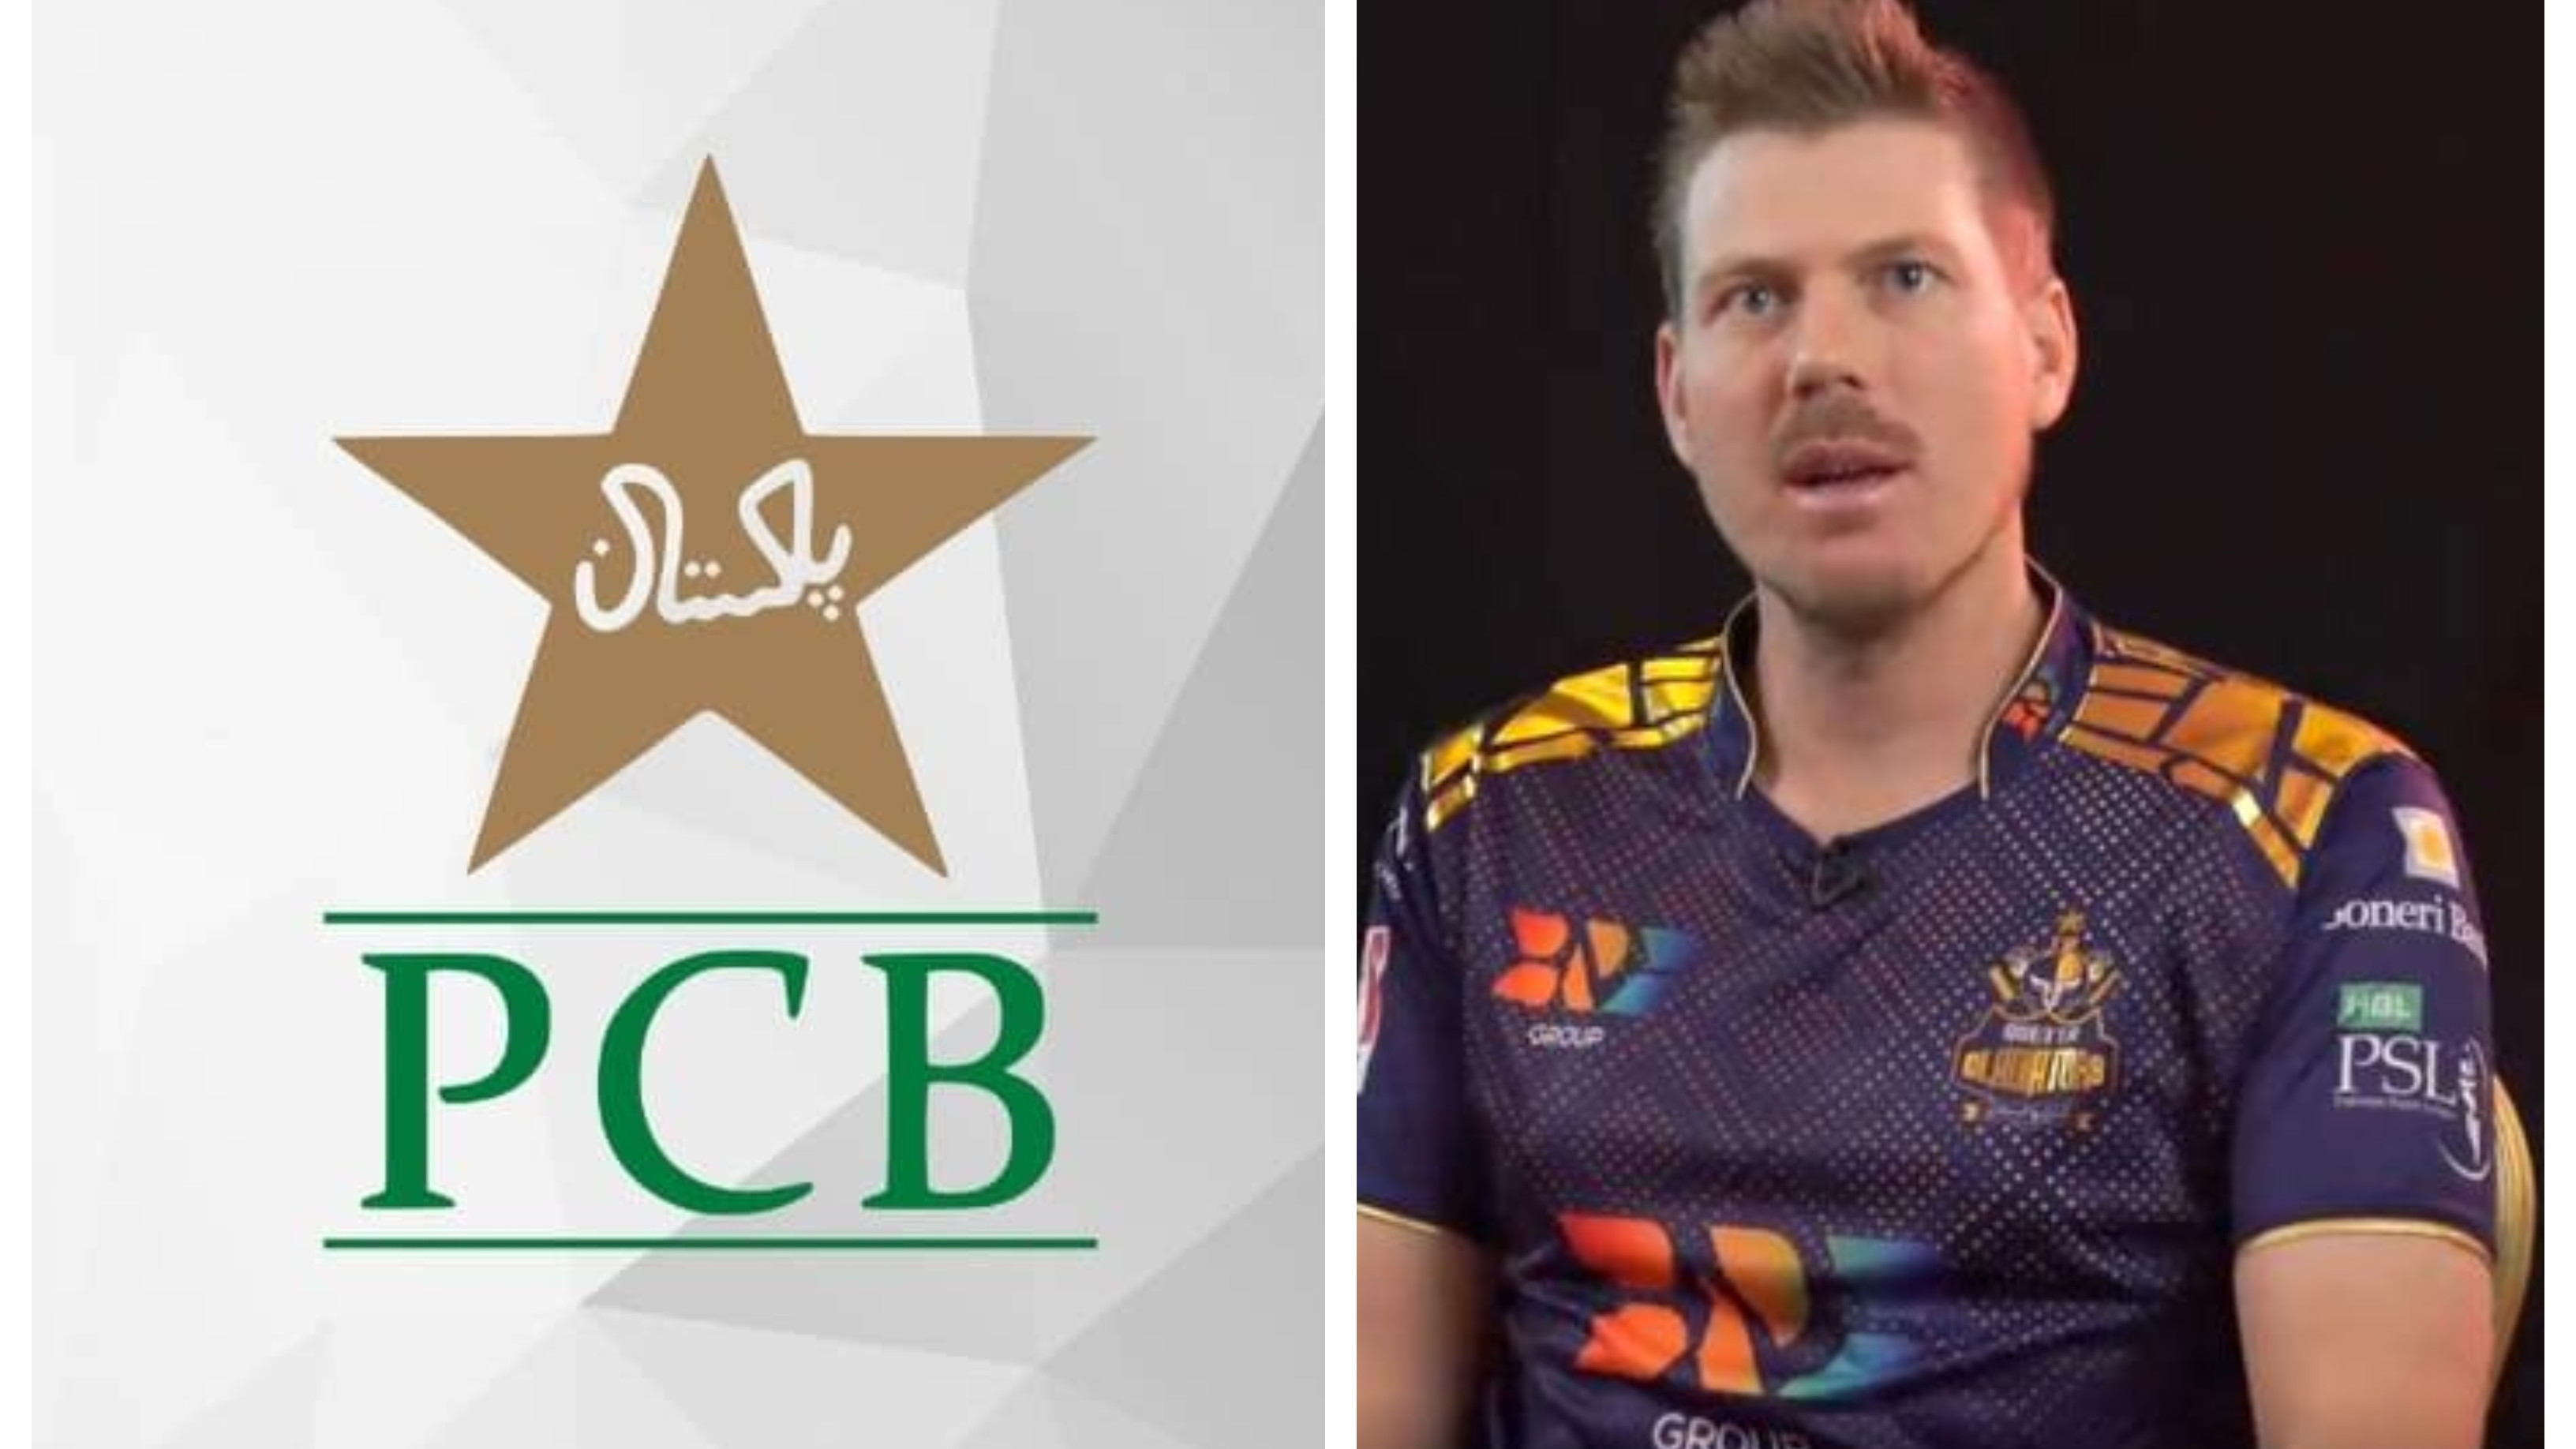 ‘James Faulkner will not be drafted in future Pakistan Super League events’: PCB